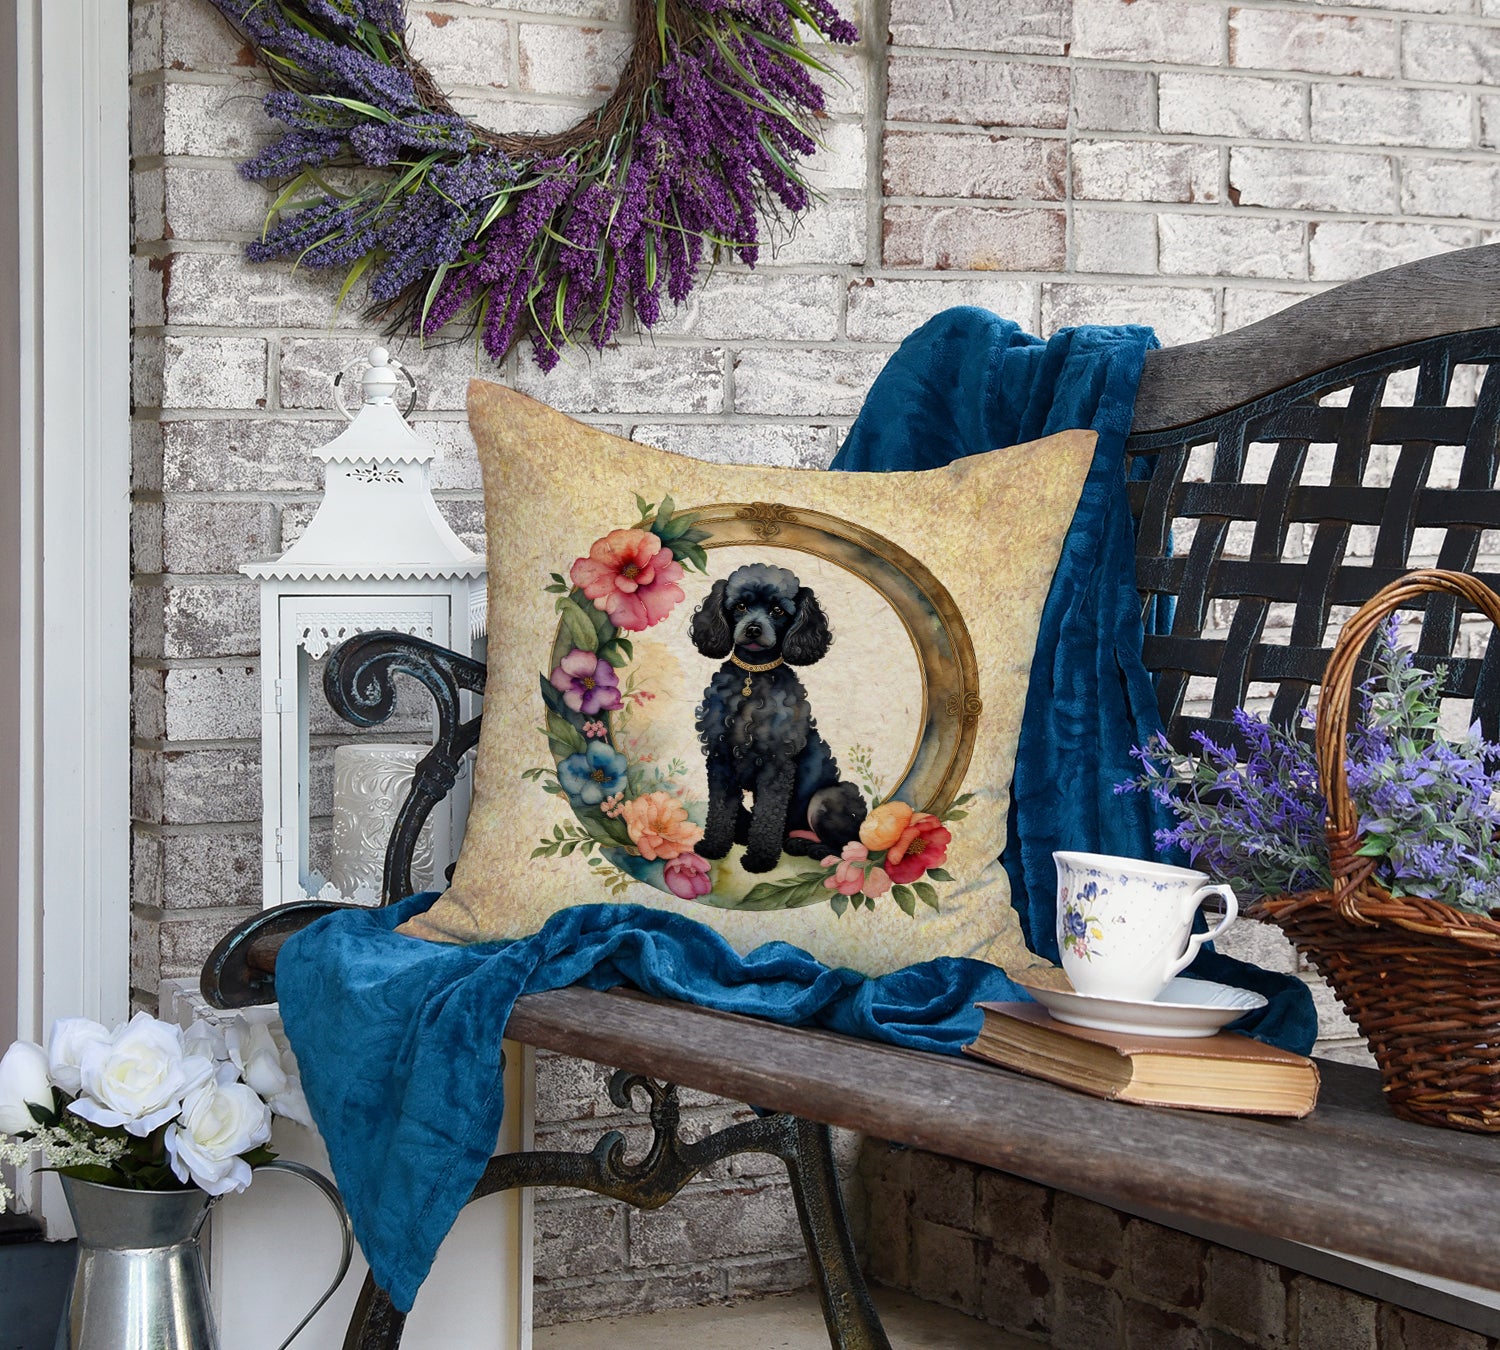 Black Poodle and Flowers Fabric Decorative Pillow